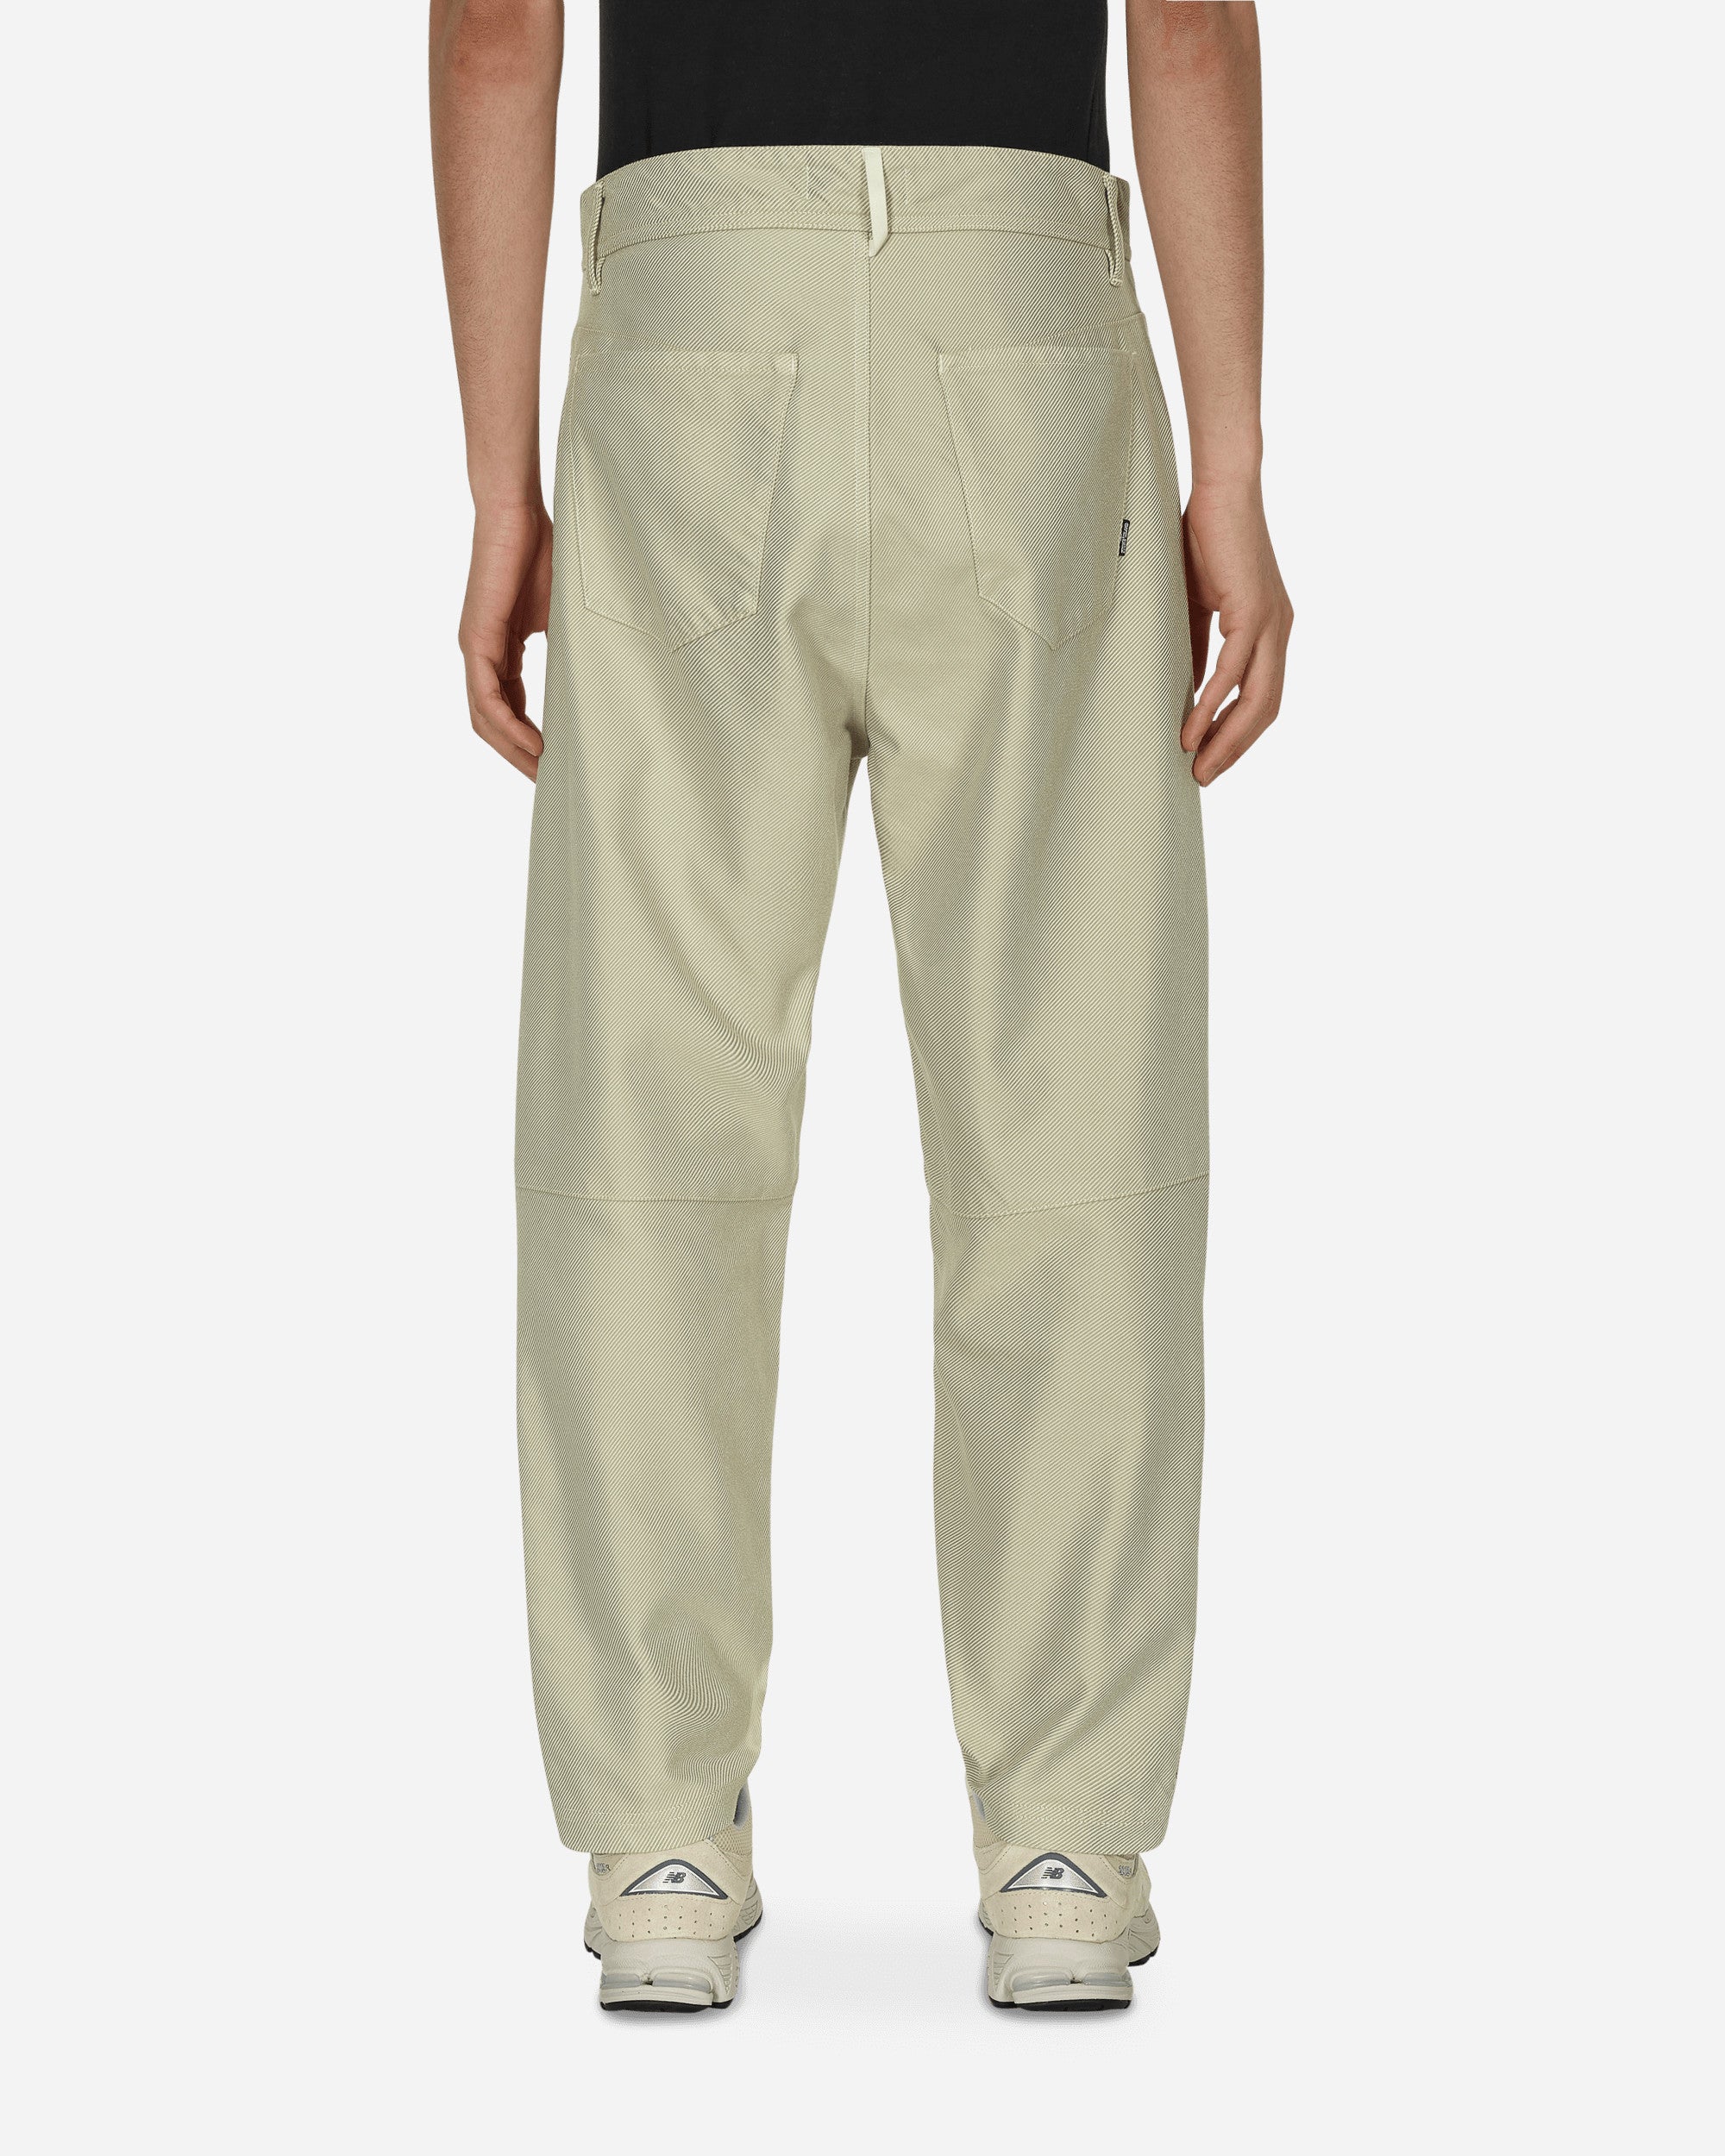 Stone Island Shadow Project Rider 5.5 Pocket Pants Natural Beige Pants Trousers 771930515 V0091